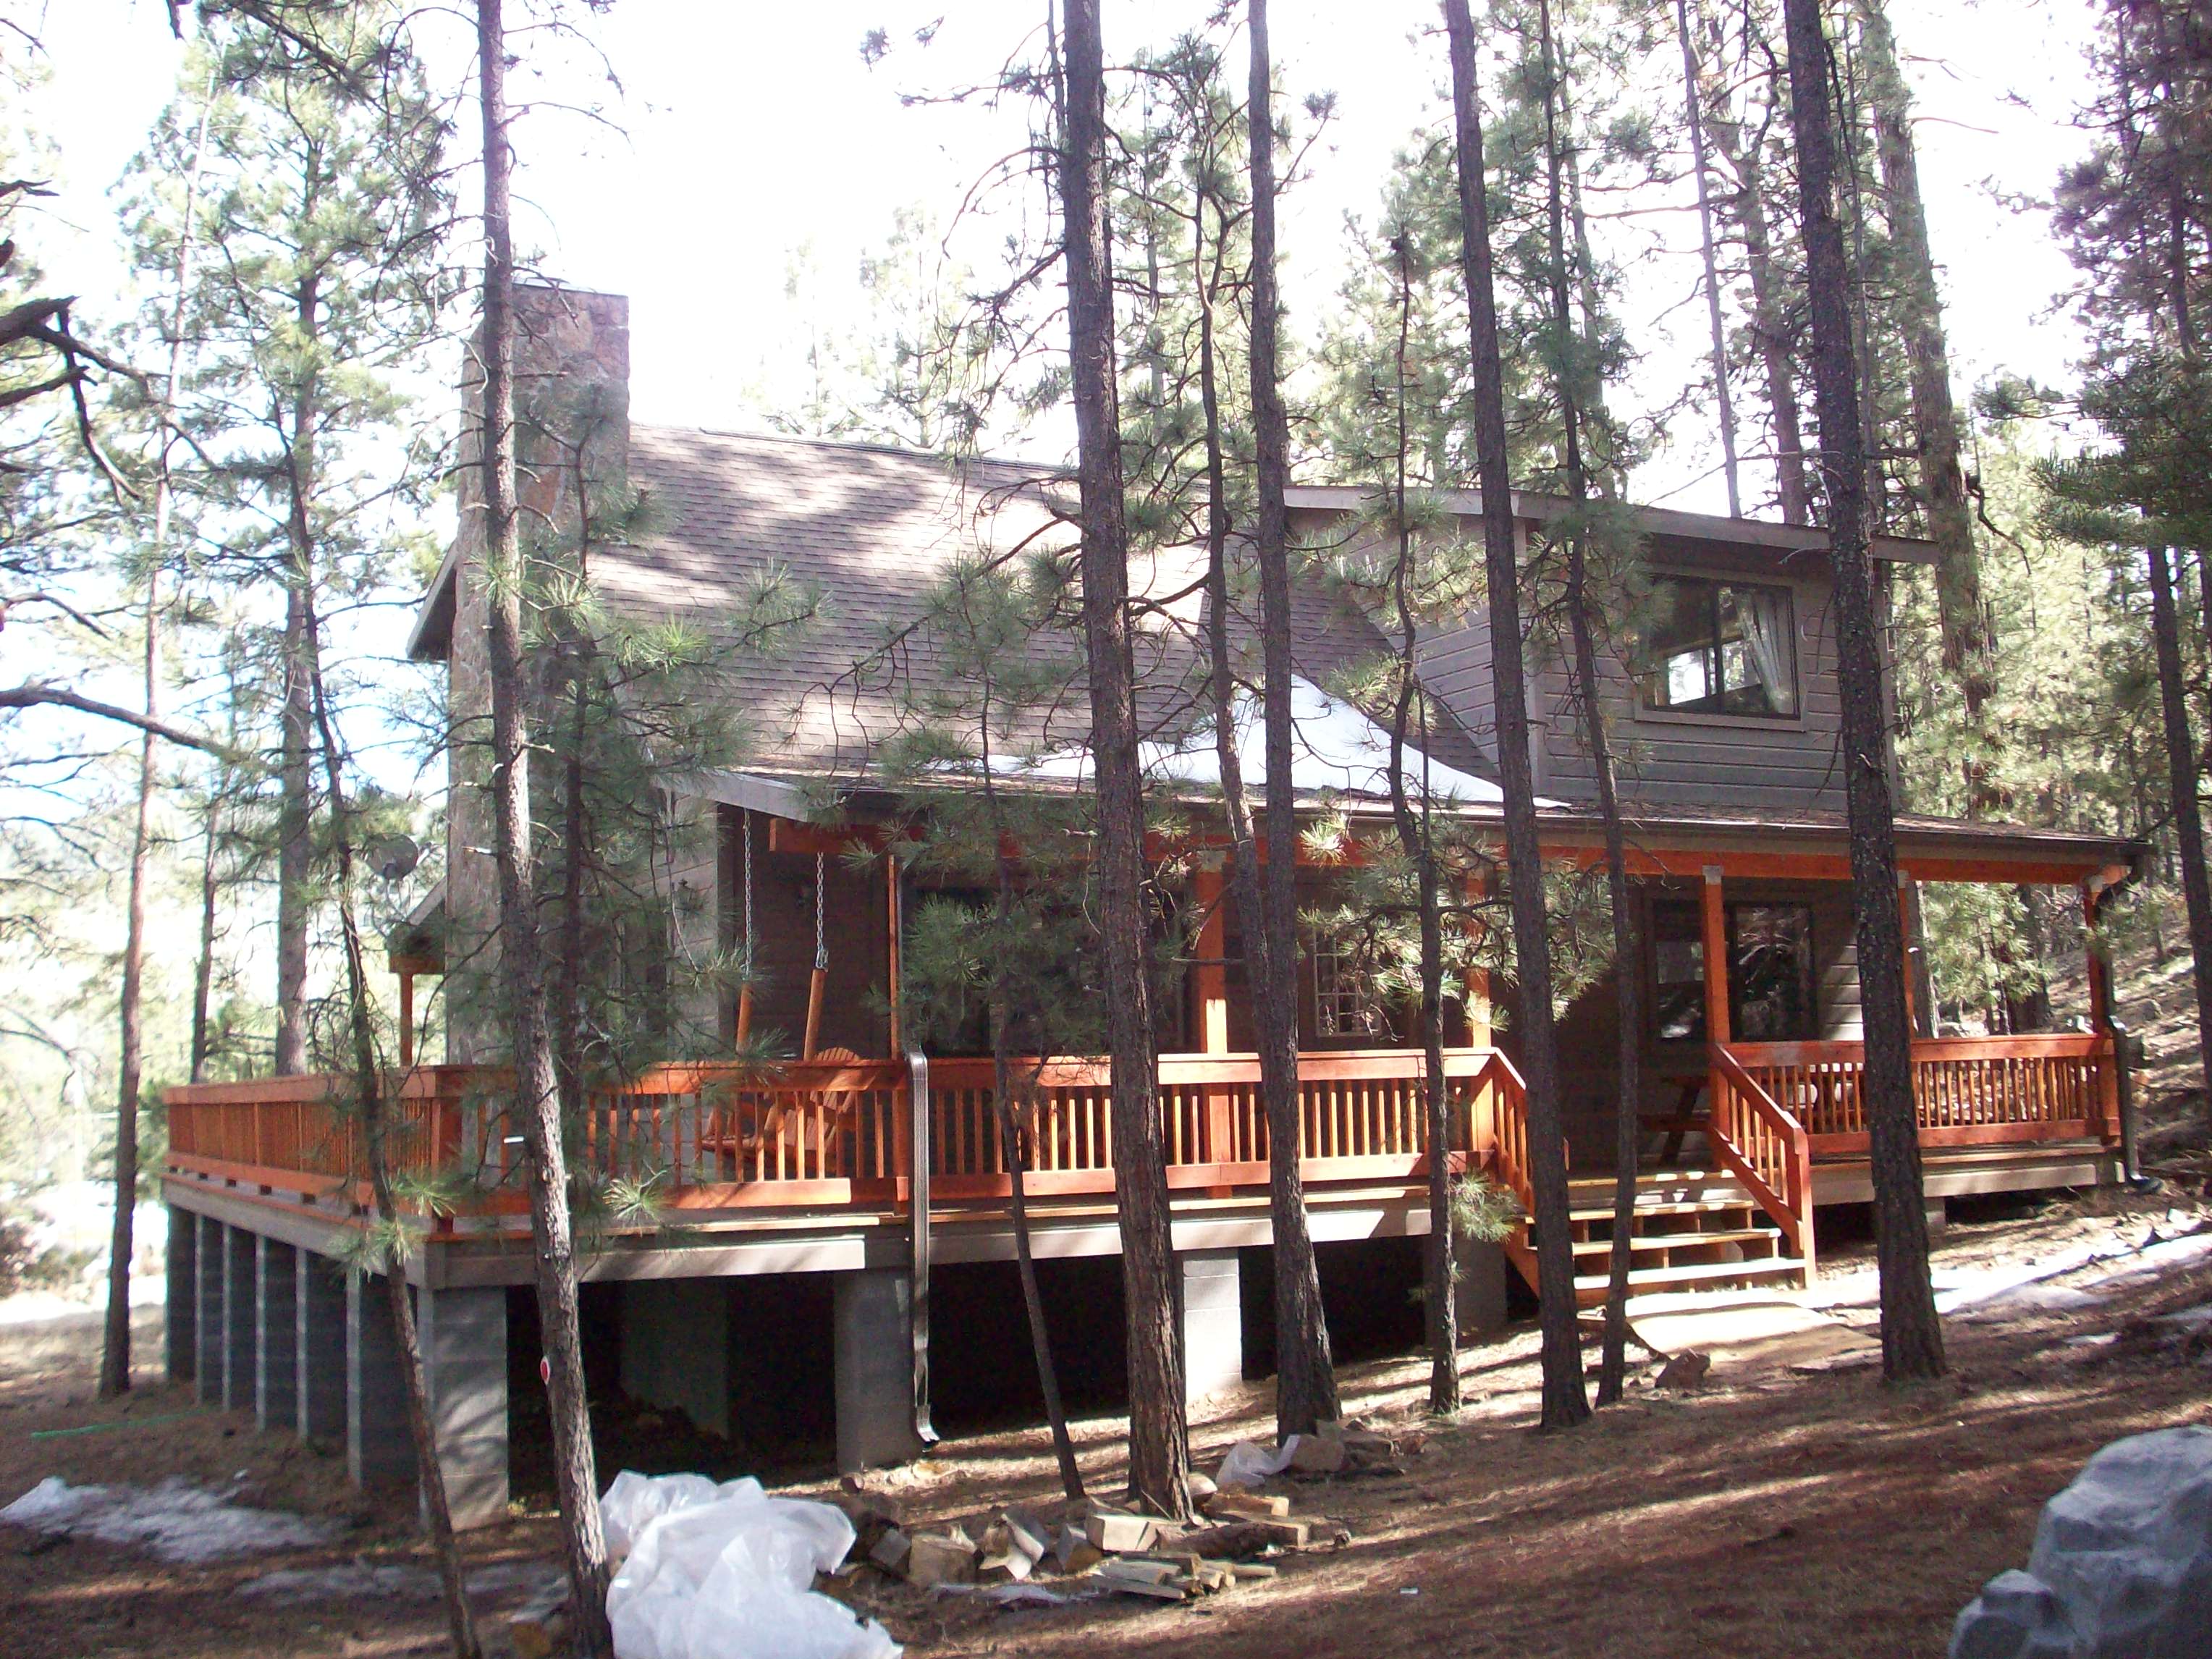 The Greer Cabin